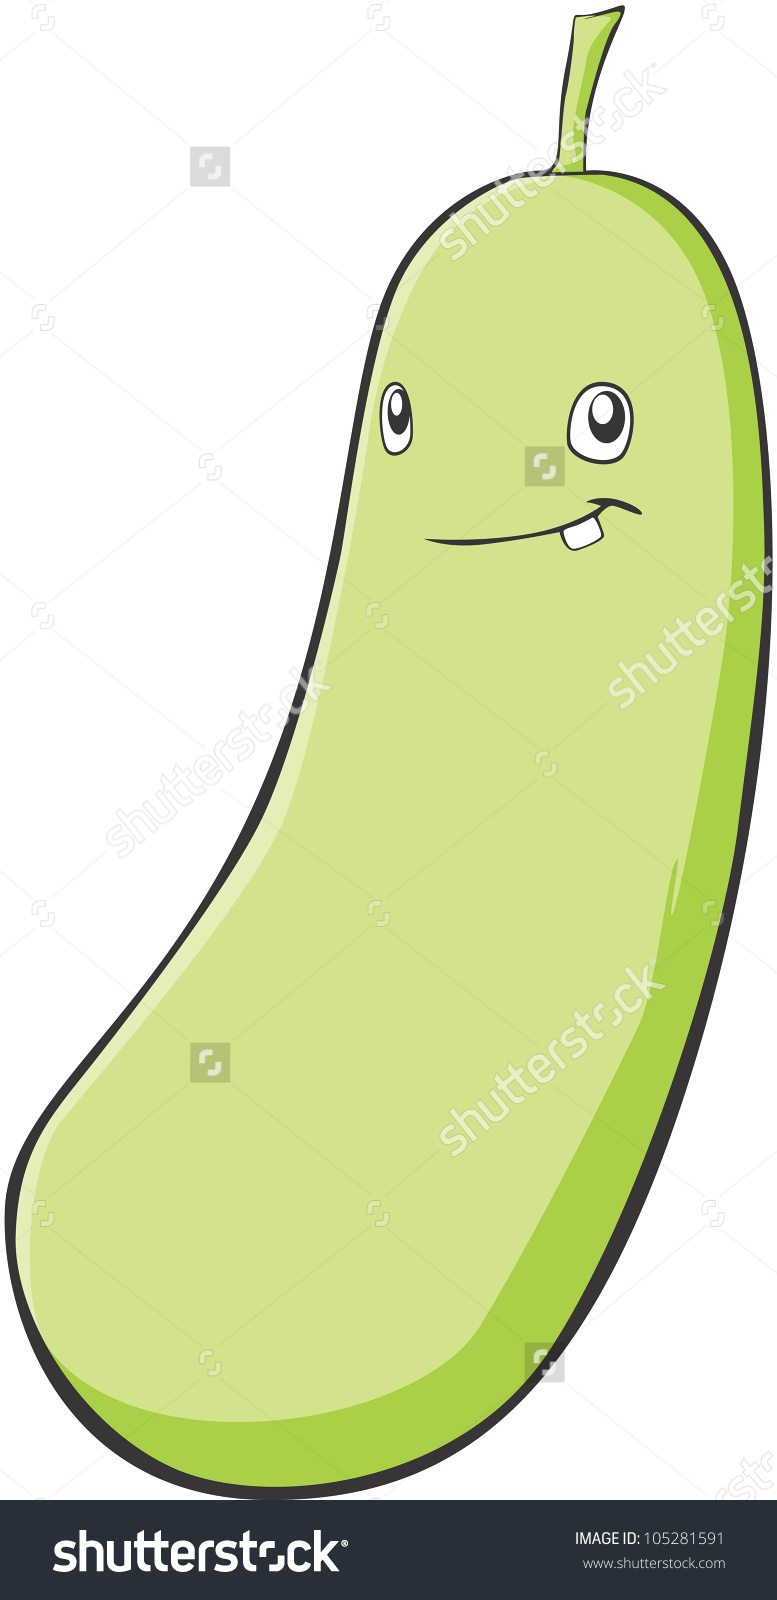 Bottle Gourd Clipart. Save to a lightbox